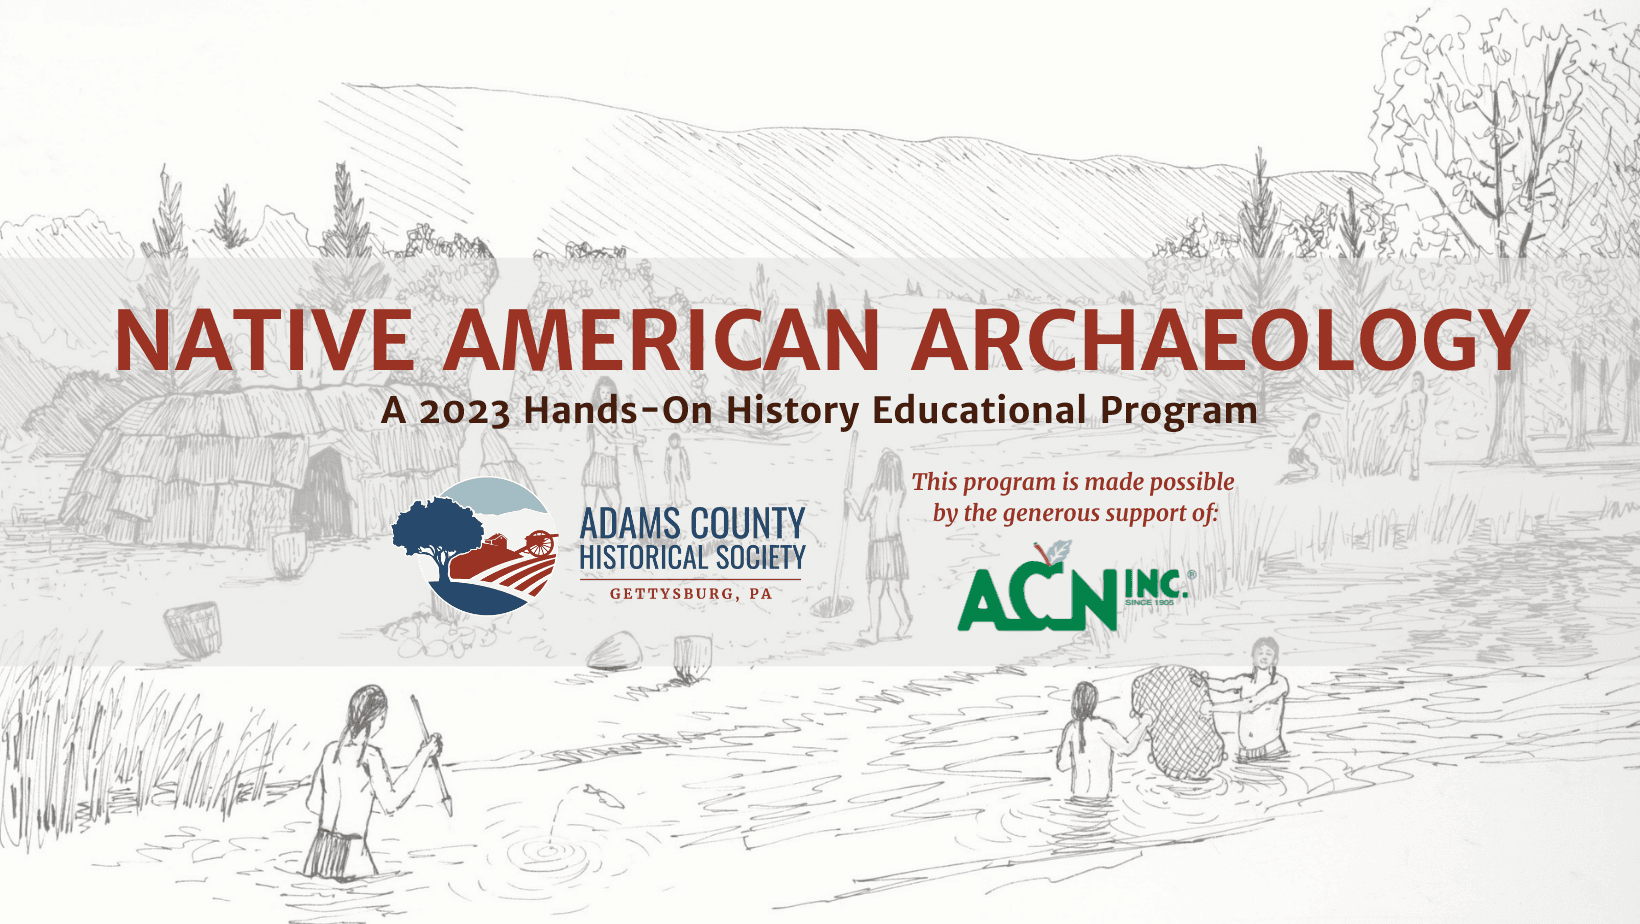 Native American Archaeology: A 2023 Hands-On History Educational Program